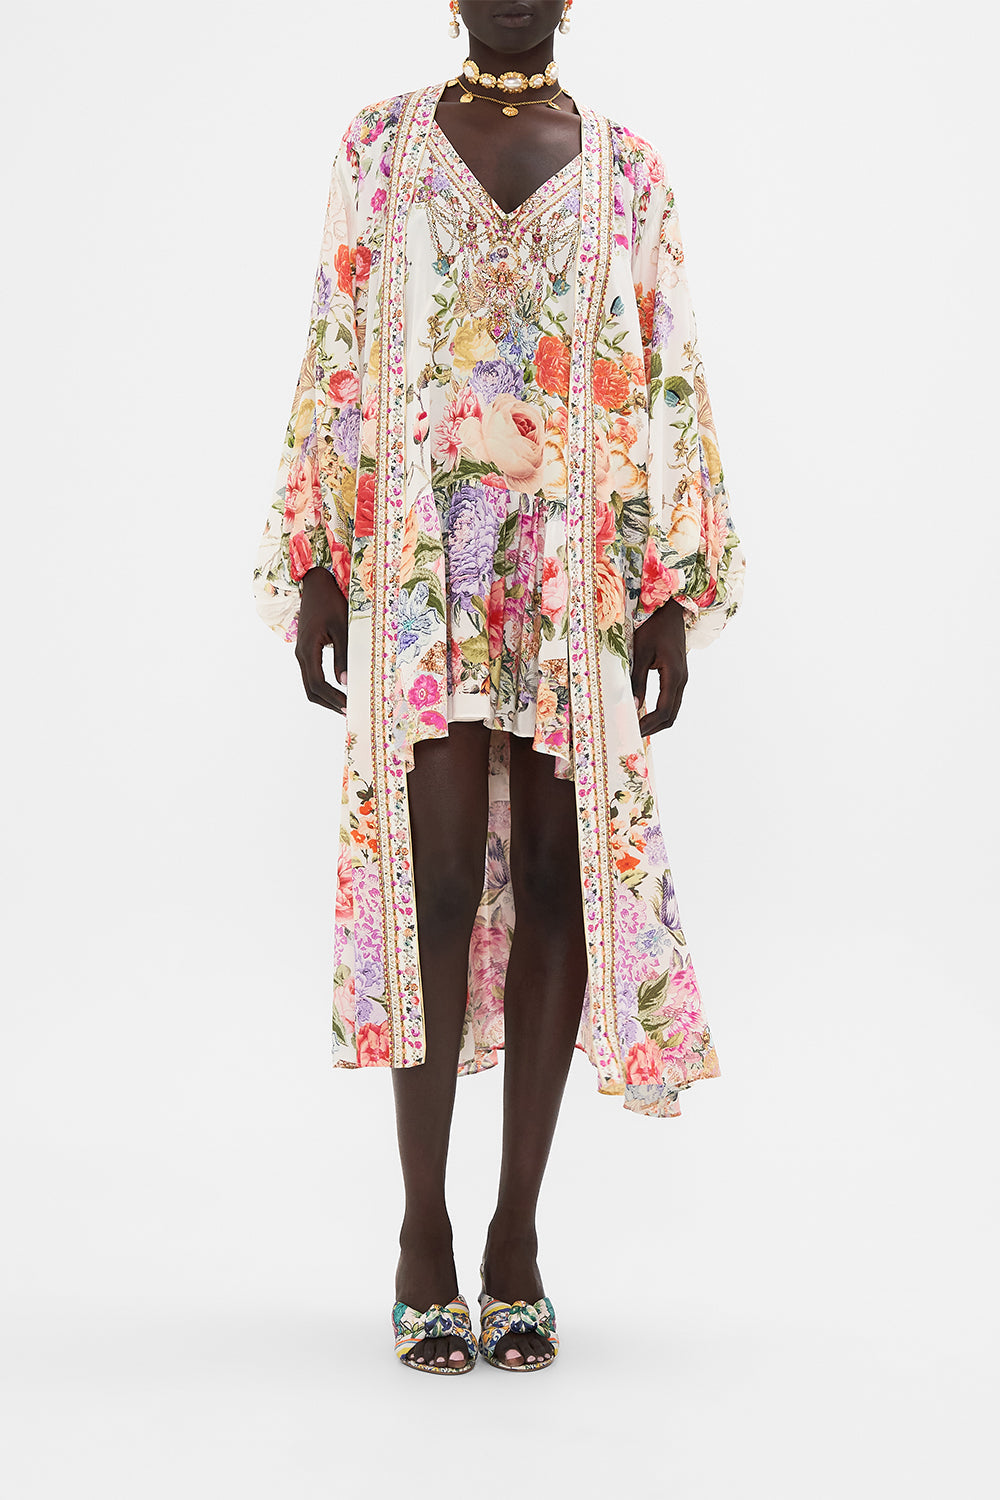 CAMILLA floral blouson sleeve layer in Sew Yesterday print